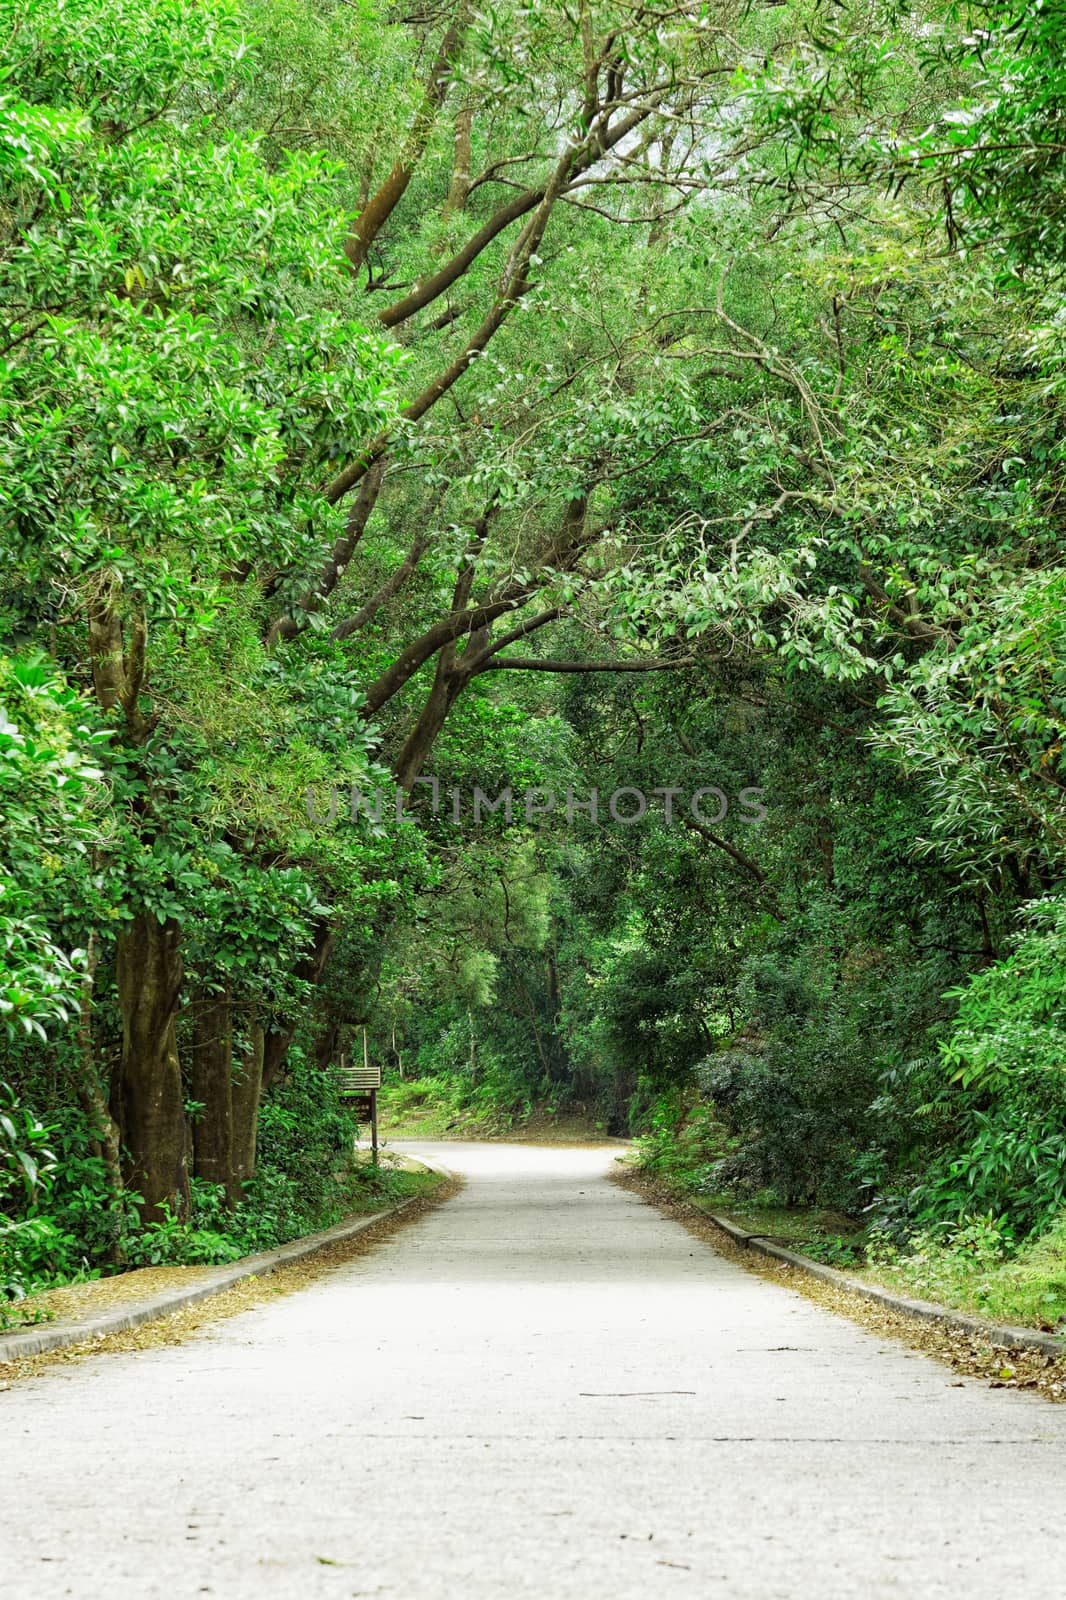 Asphalt road through the forest at day